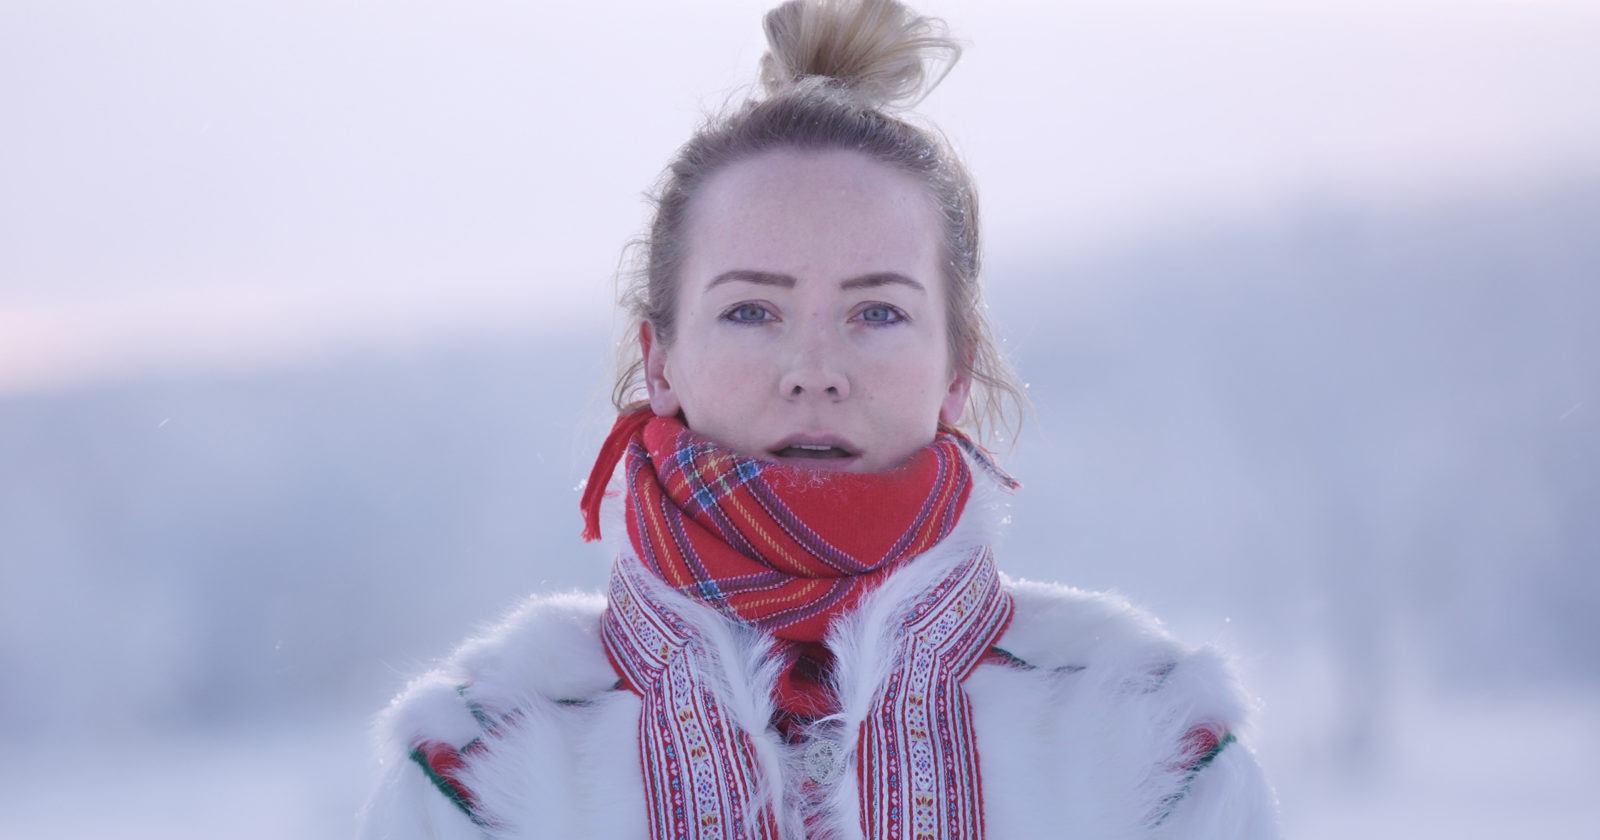 A young woman in a snowy winter landscape wearing a traditional Lapp reindeer jacket and a red scarf.